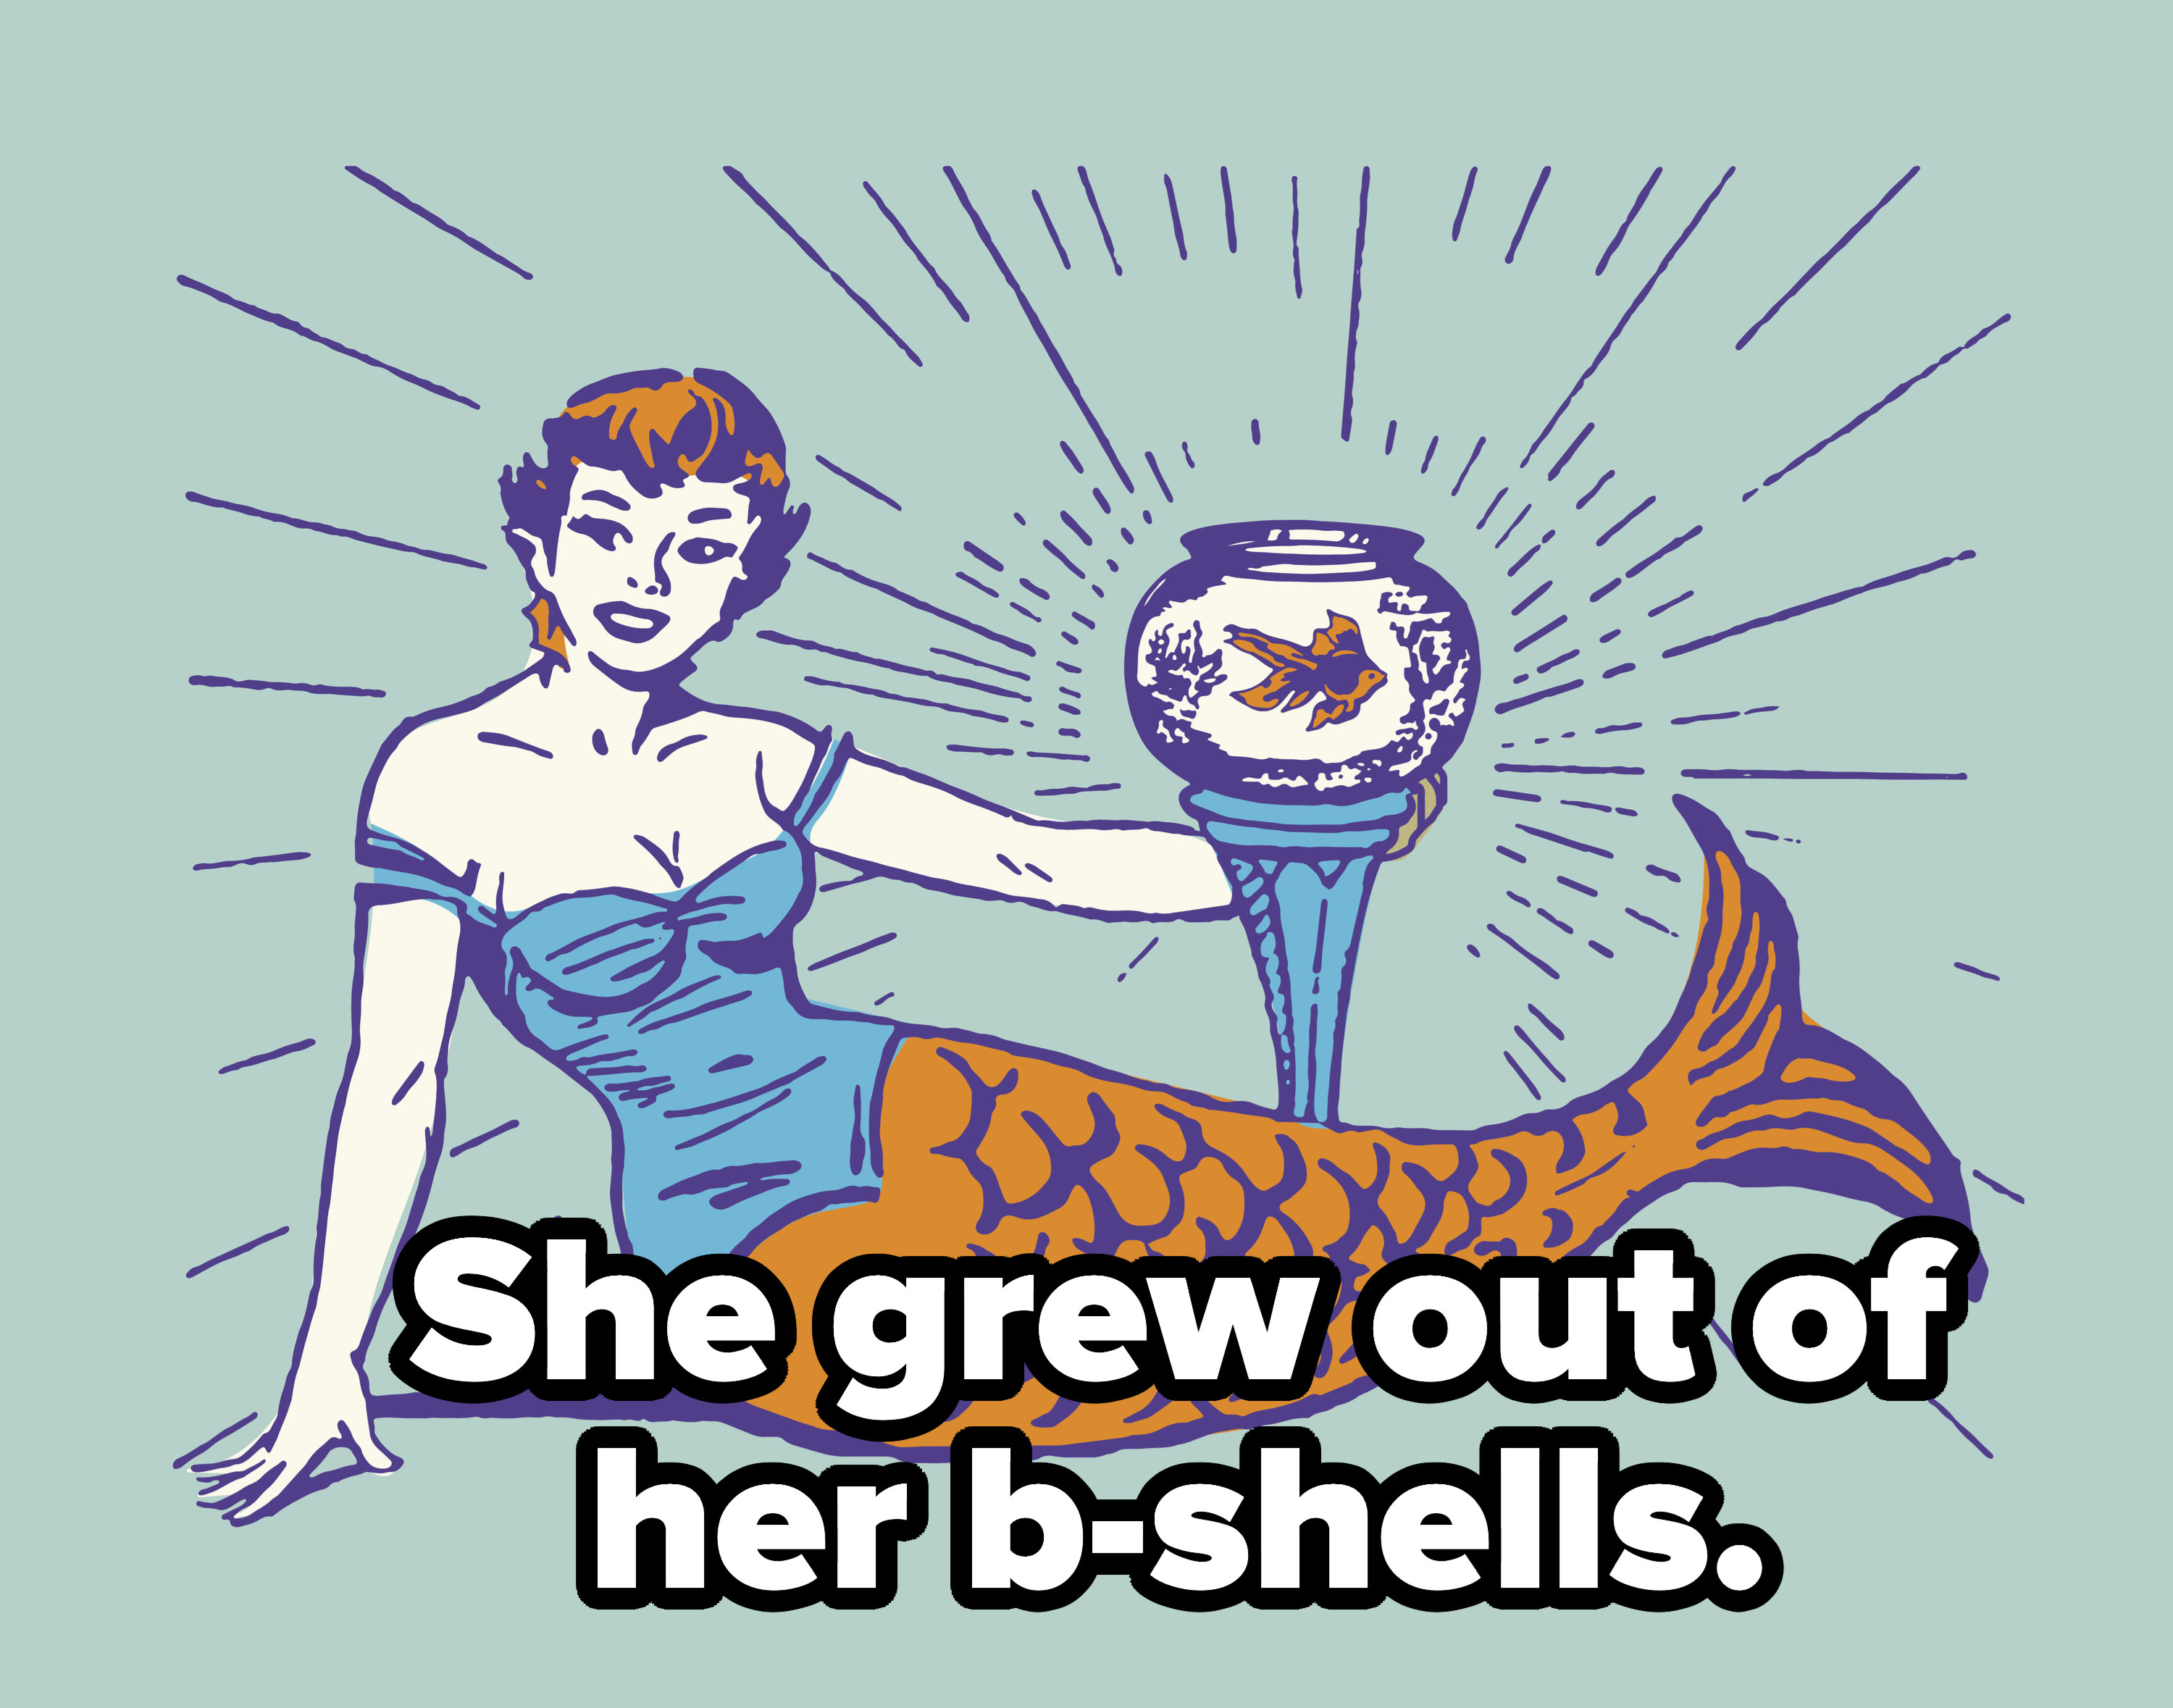 She grew out of her B-shells